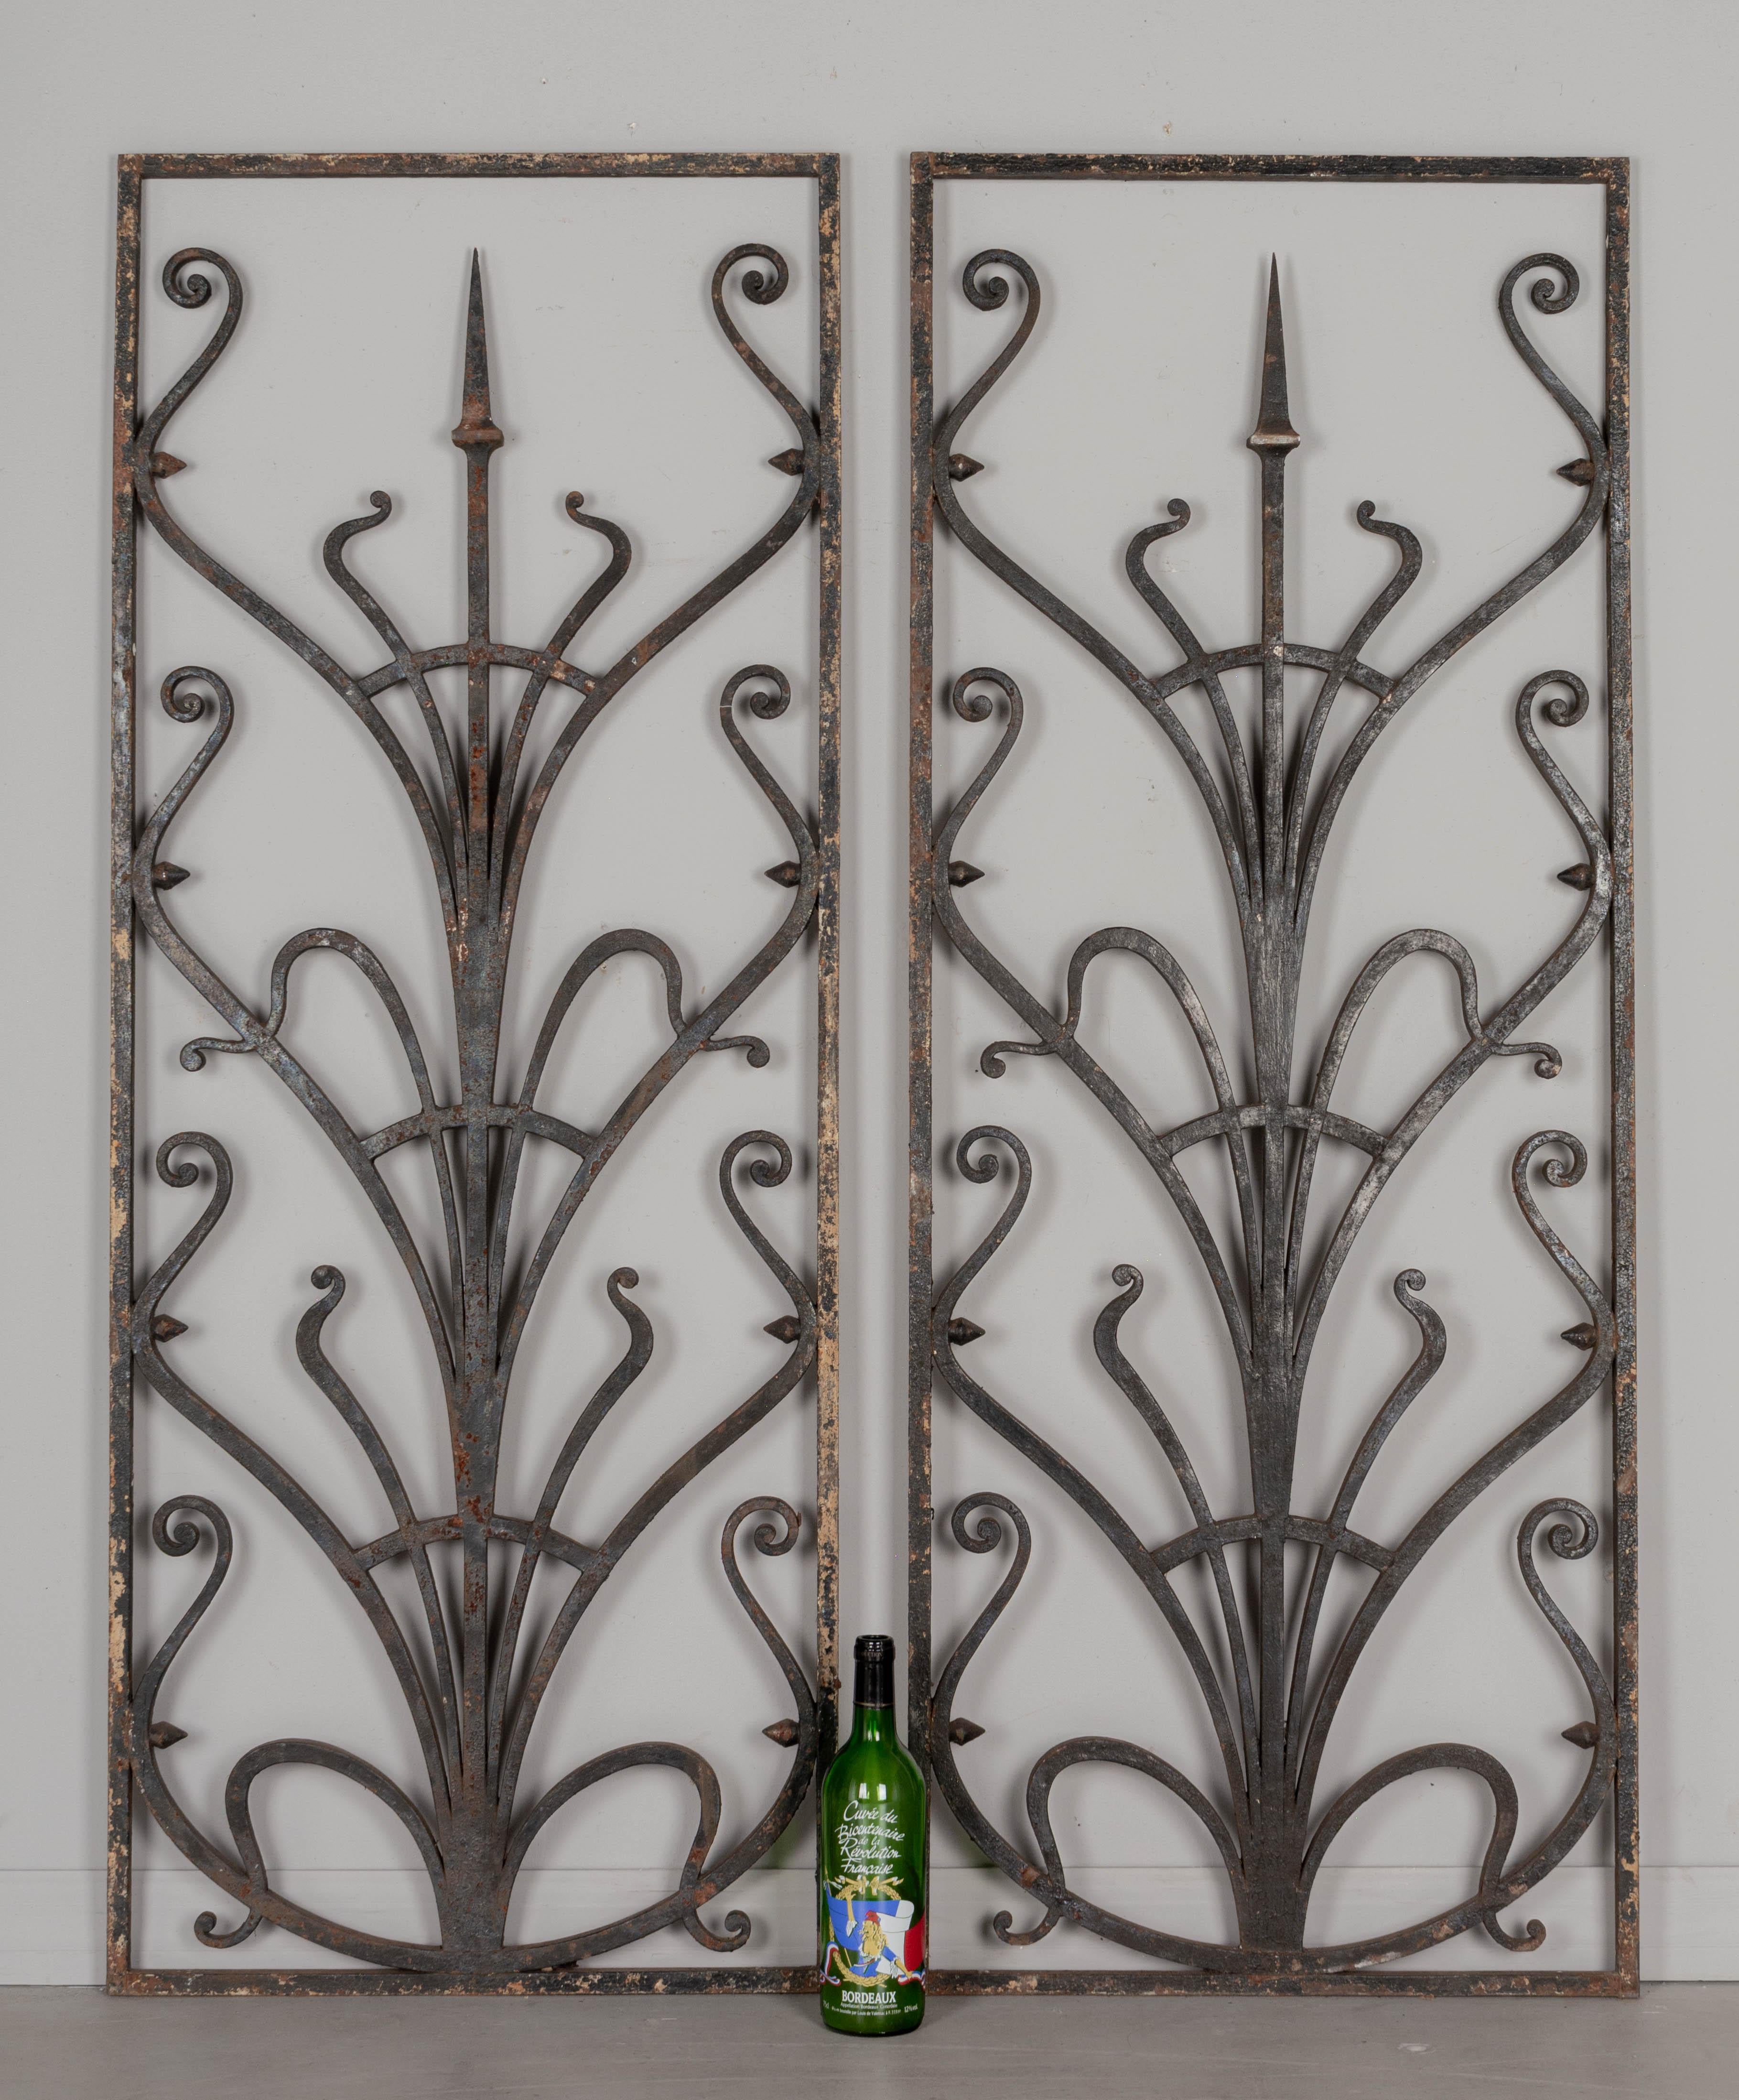 A pair of French Art Nouveau wrought iron garden gate grilles or decorative panels with dark painted patina. Good quality iron work. Some rust and peeling paint. Please refer to photos for more details. Pictures are part of the description. Circa